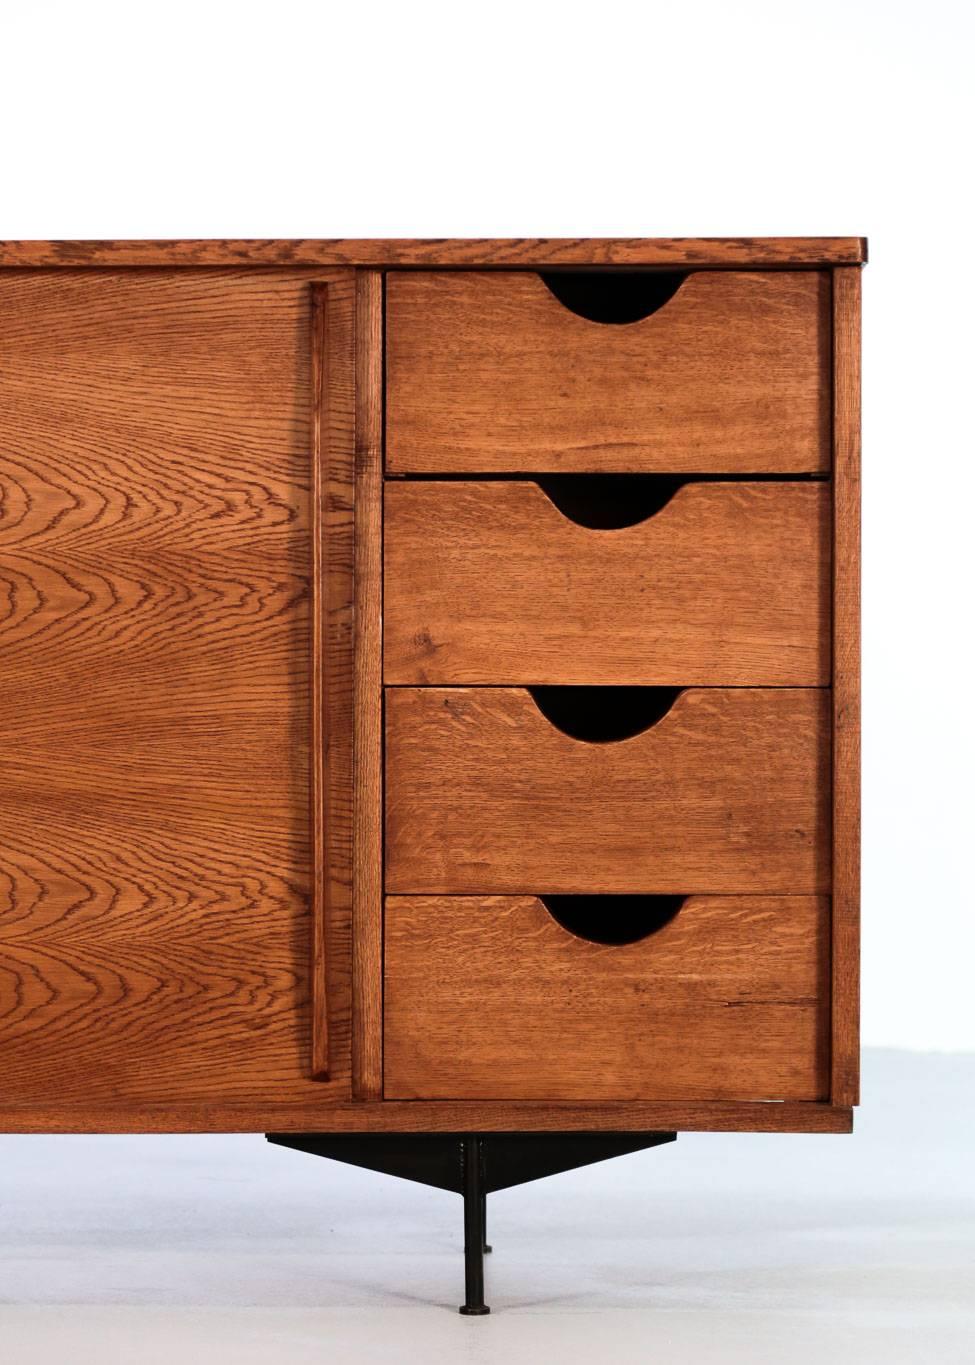 French Sideboard in Style of Jean Prouvé Design, 1960 Oak